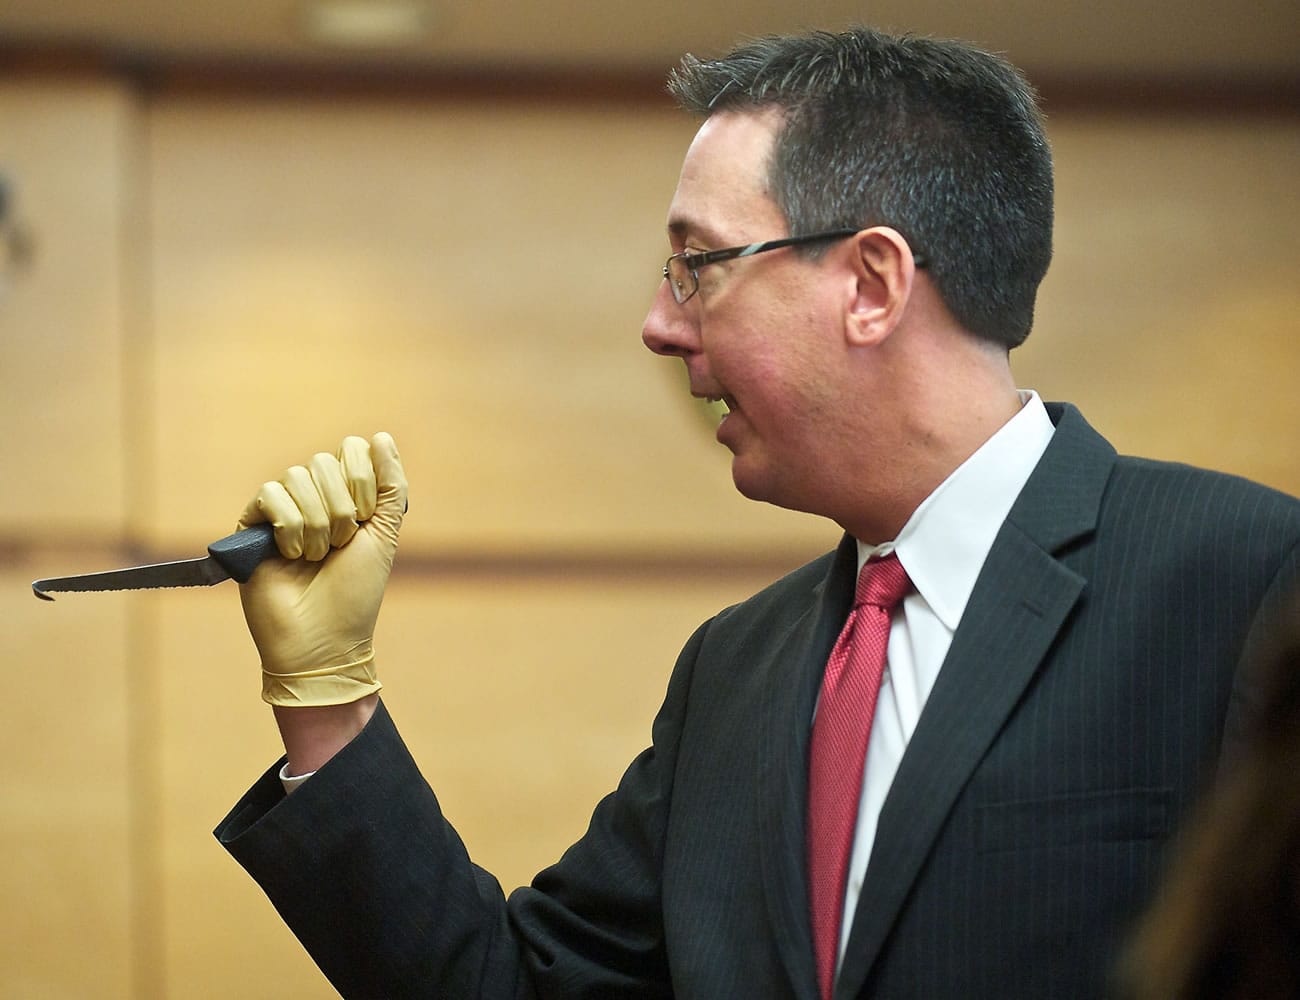 During closing arguments Wednesday, Clark County Prosecuting Attorney Tony Golik shows the jury a bent knife, one of five Dennis Wolter allegedly used to kill his estranged girlfriend, Kori Fredericksen, in May 2011.